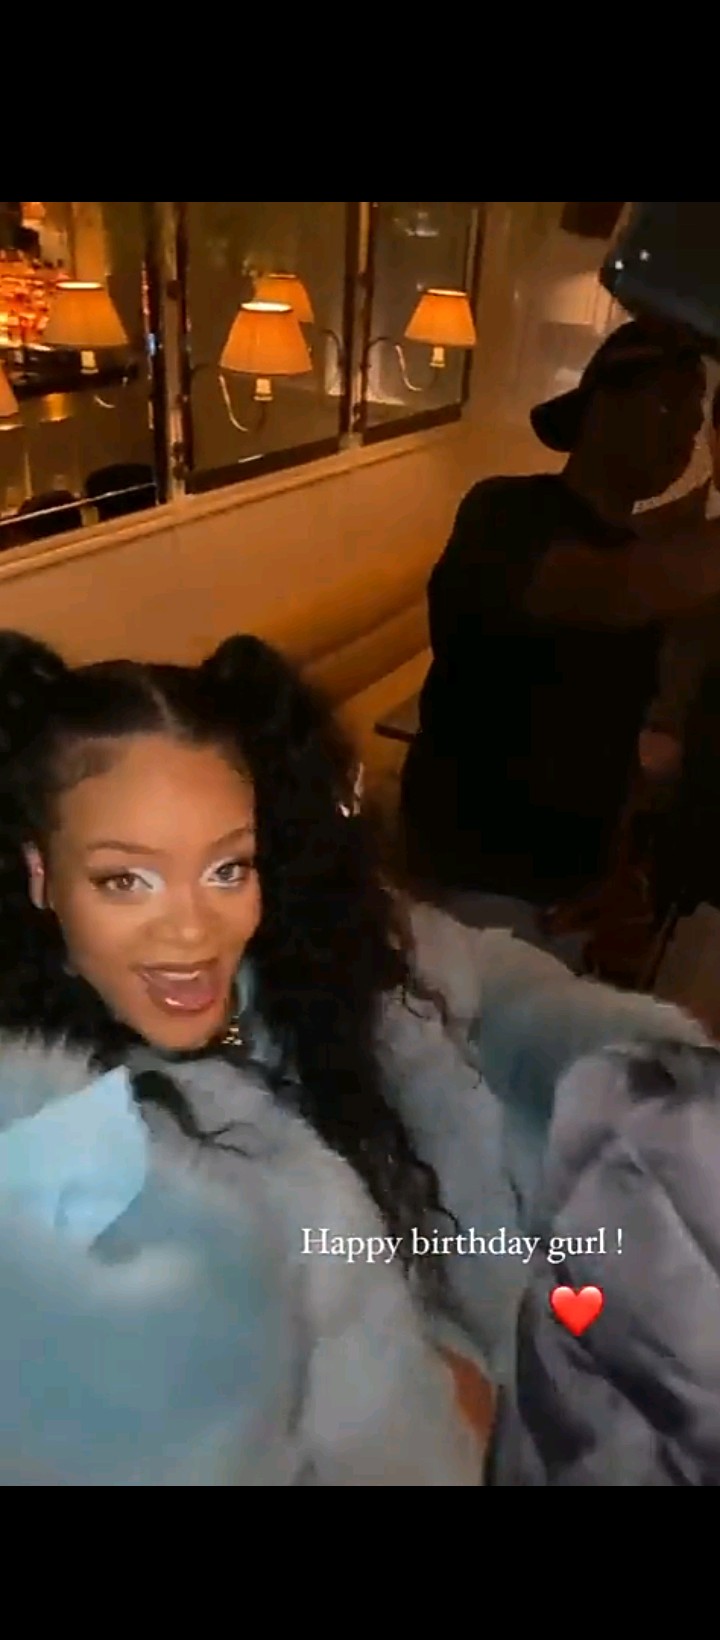 Pregnant Rihanna shows her baby bump in blue fur coat as she celebrates her 34th birthday